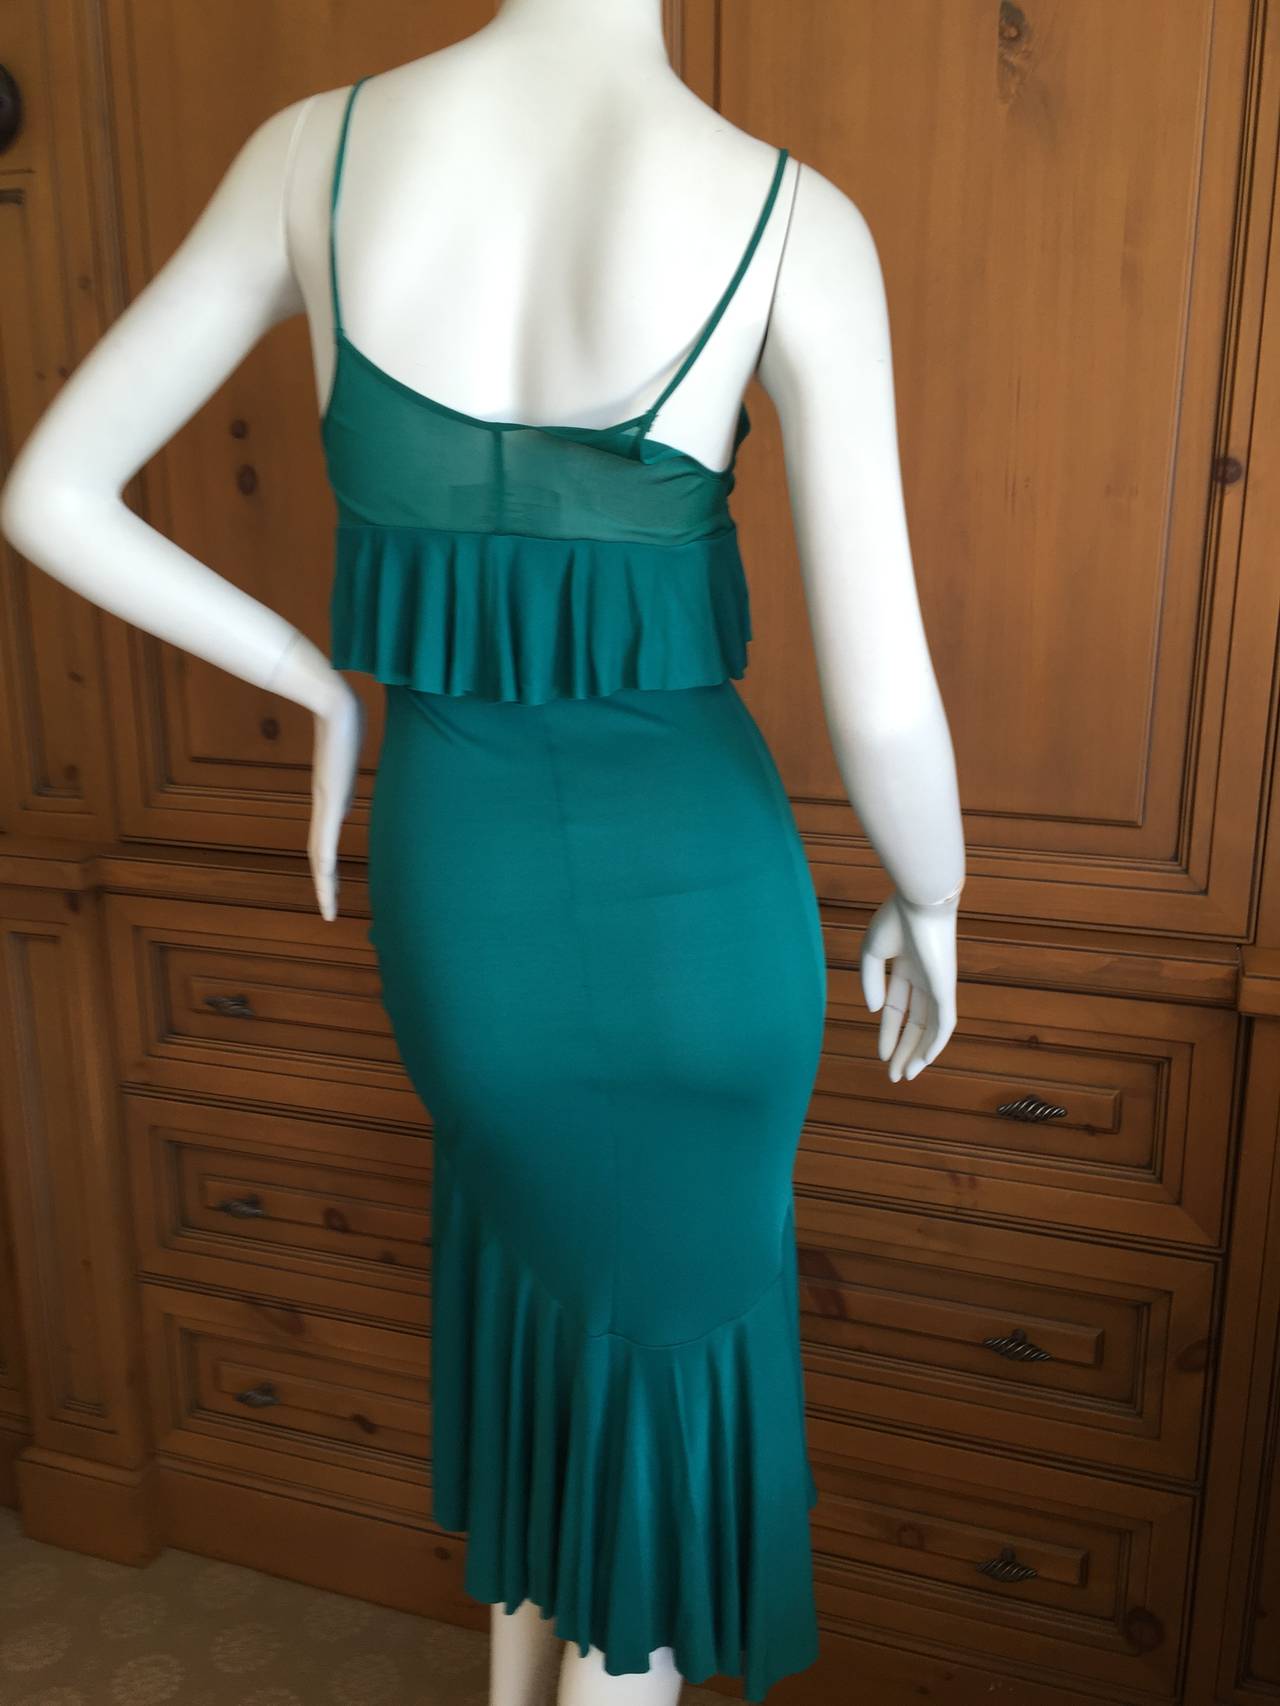 Yves Saint Laurent by Tom Ford 2002 Silk Ruffle Dress In Excellent Condition For Sale In Cloverdale, CA